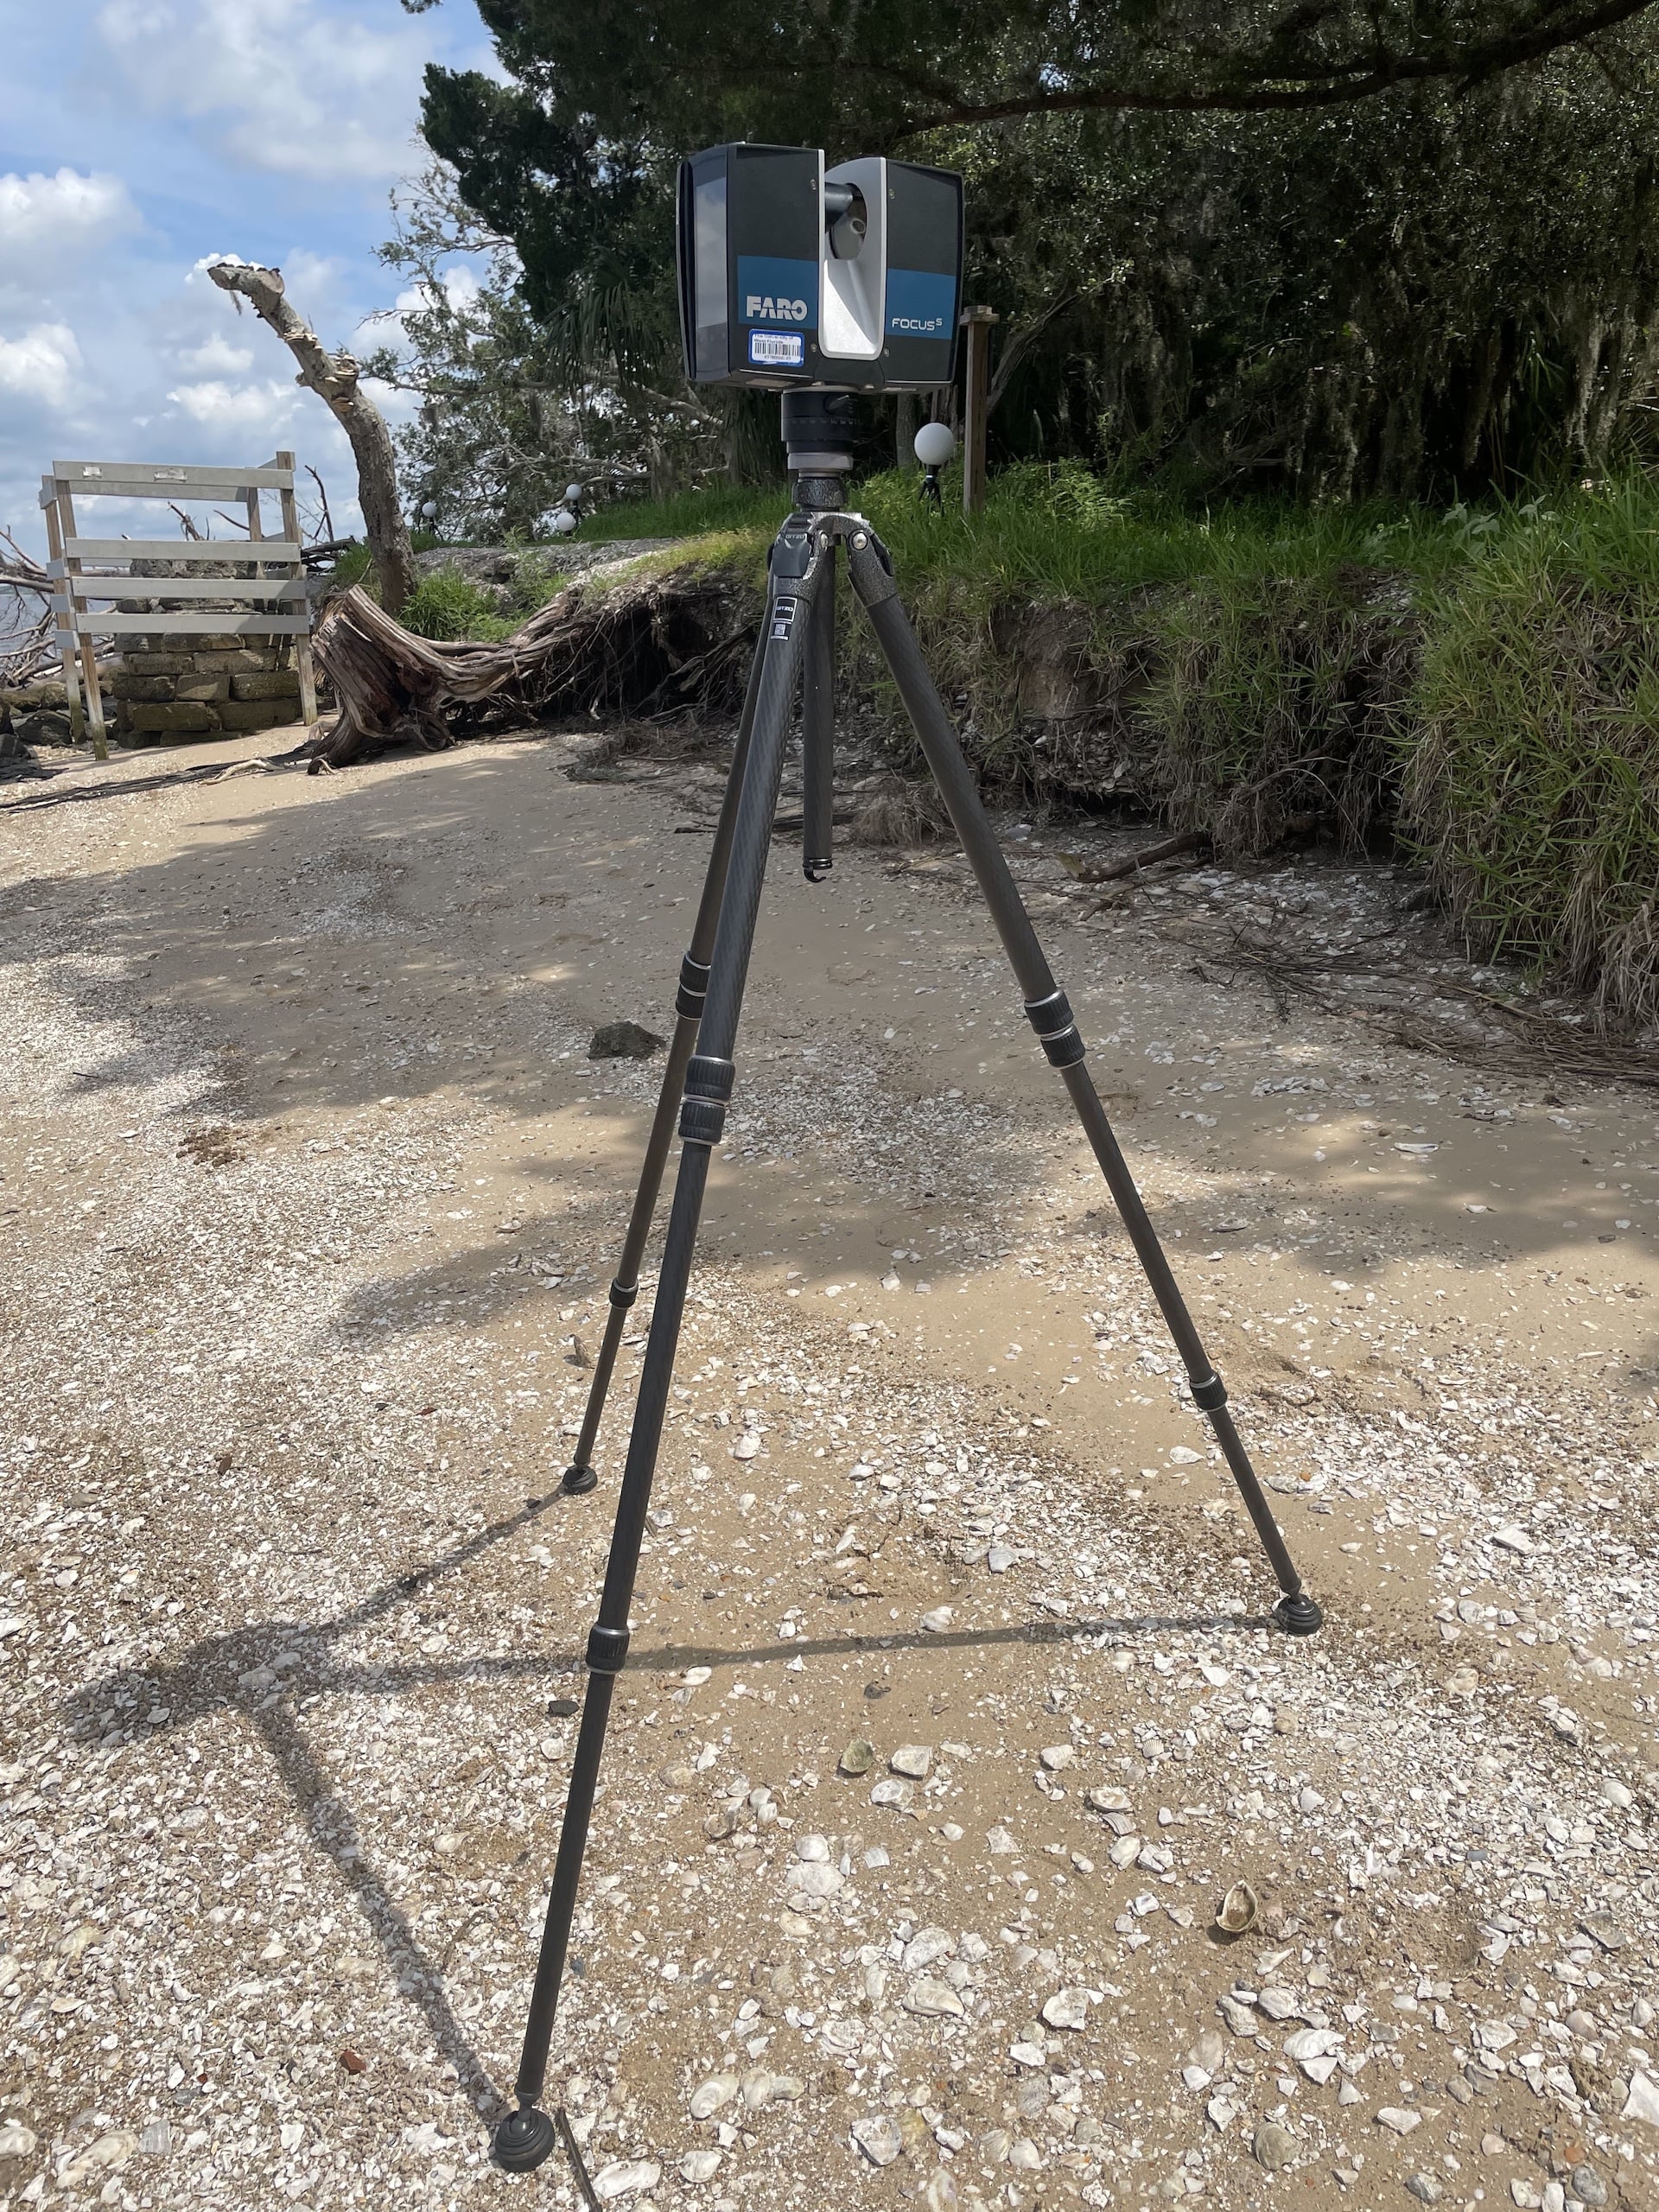 FPAN uses a Faro Focus 350s terrestrial laser scanner to document erosion